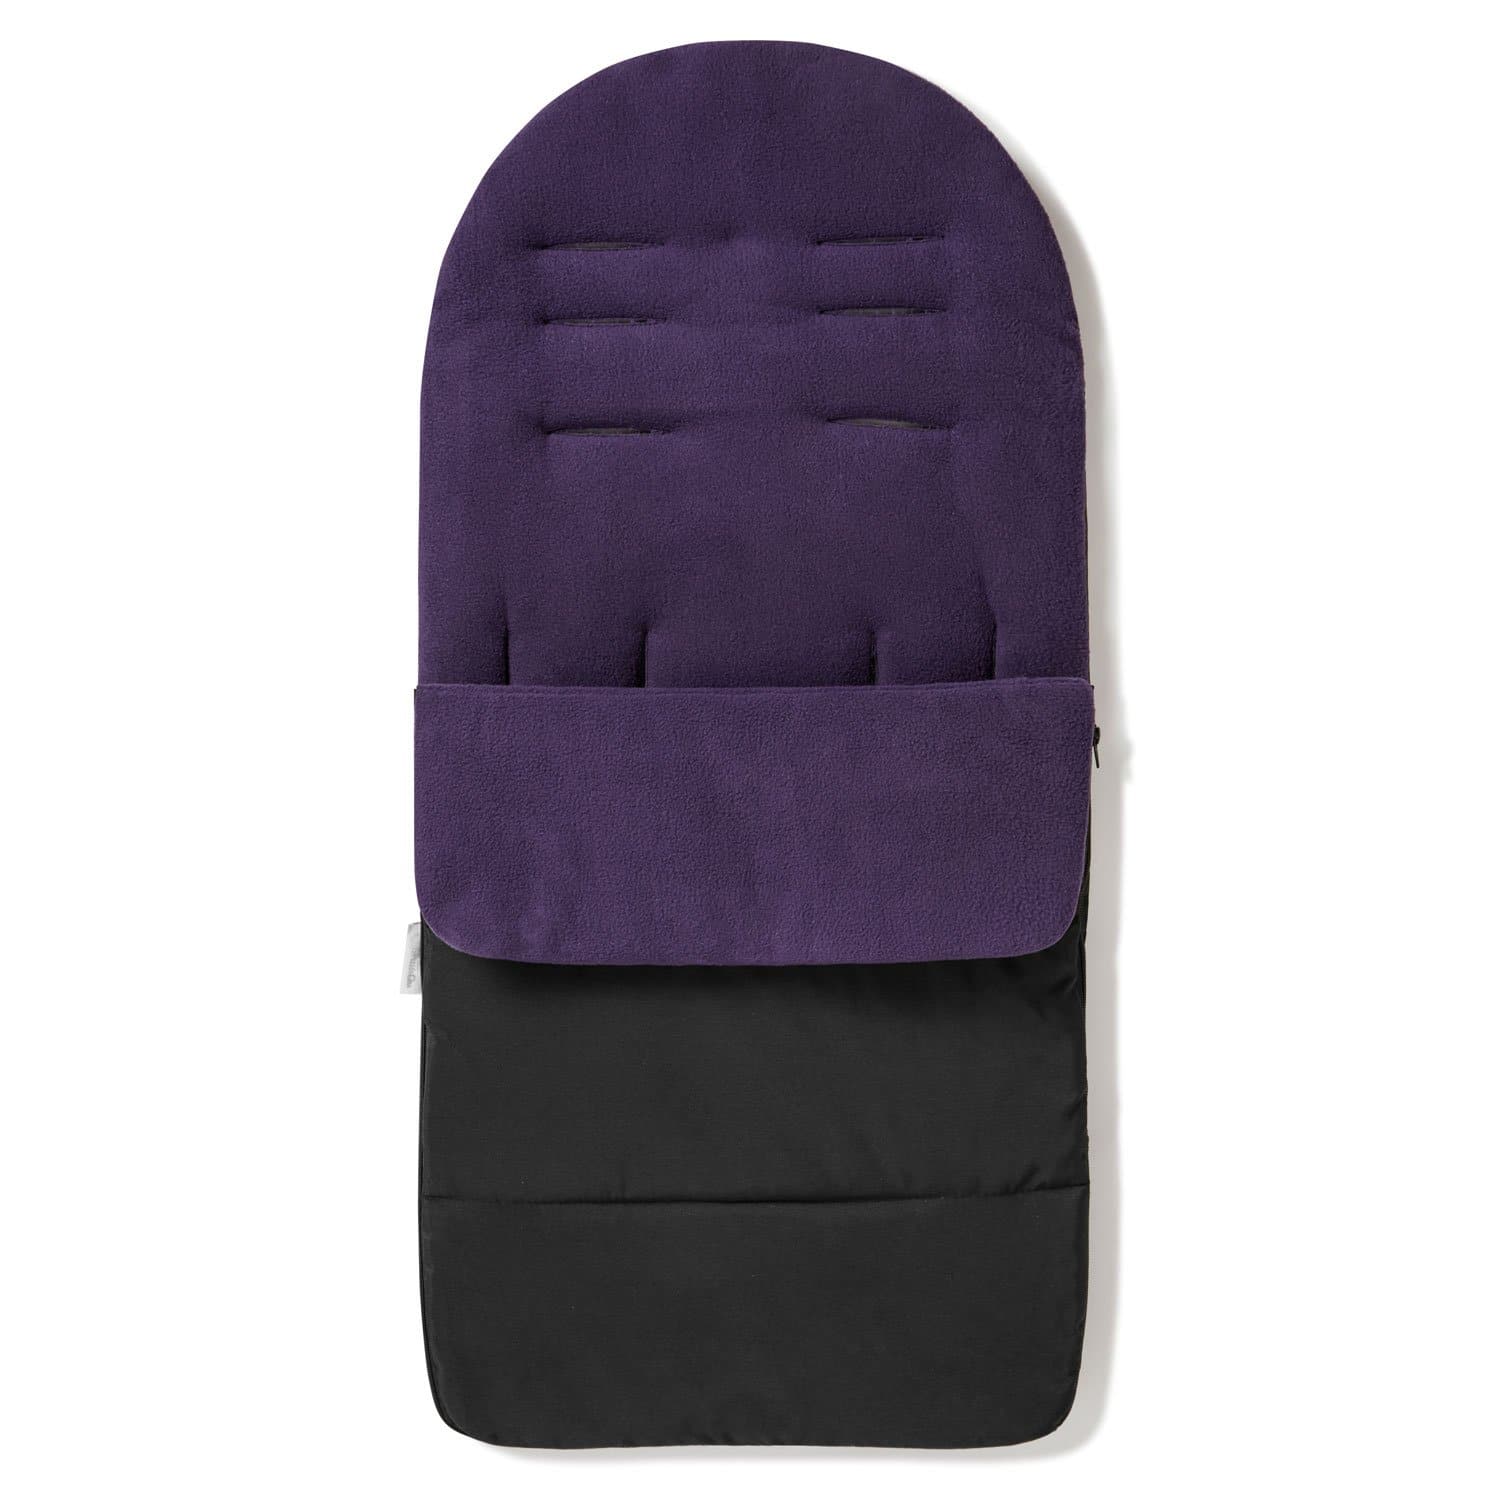 Premium Footmuff / Cosy Toes Compatible with Chicco - Plum Purple / Fits All Models | For Your Little One